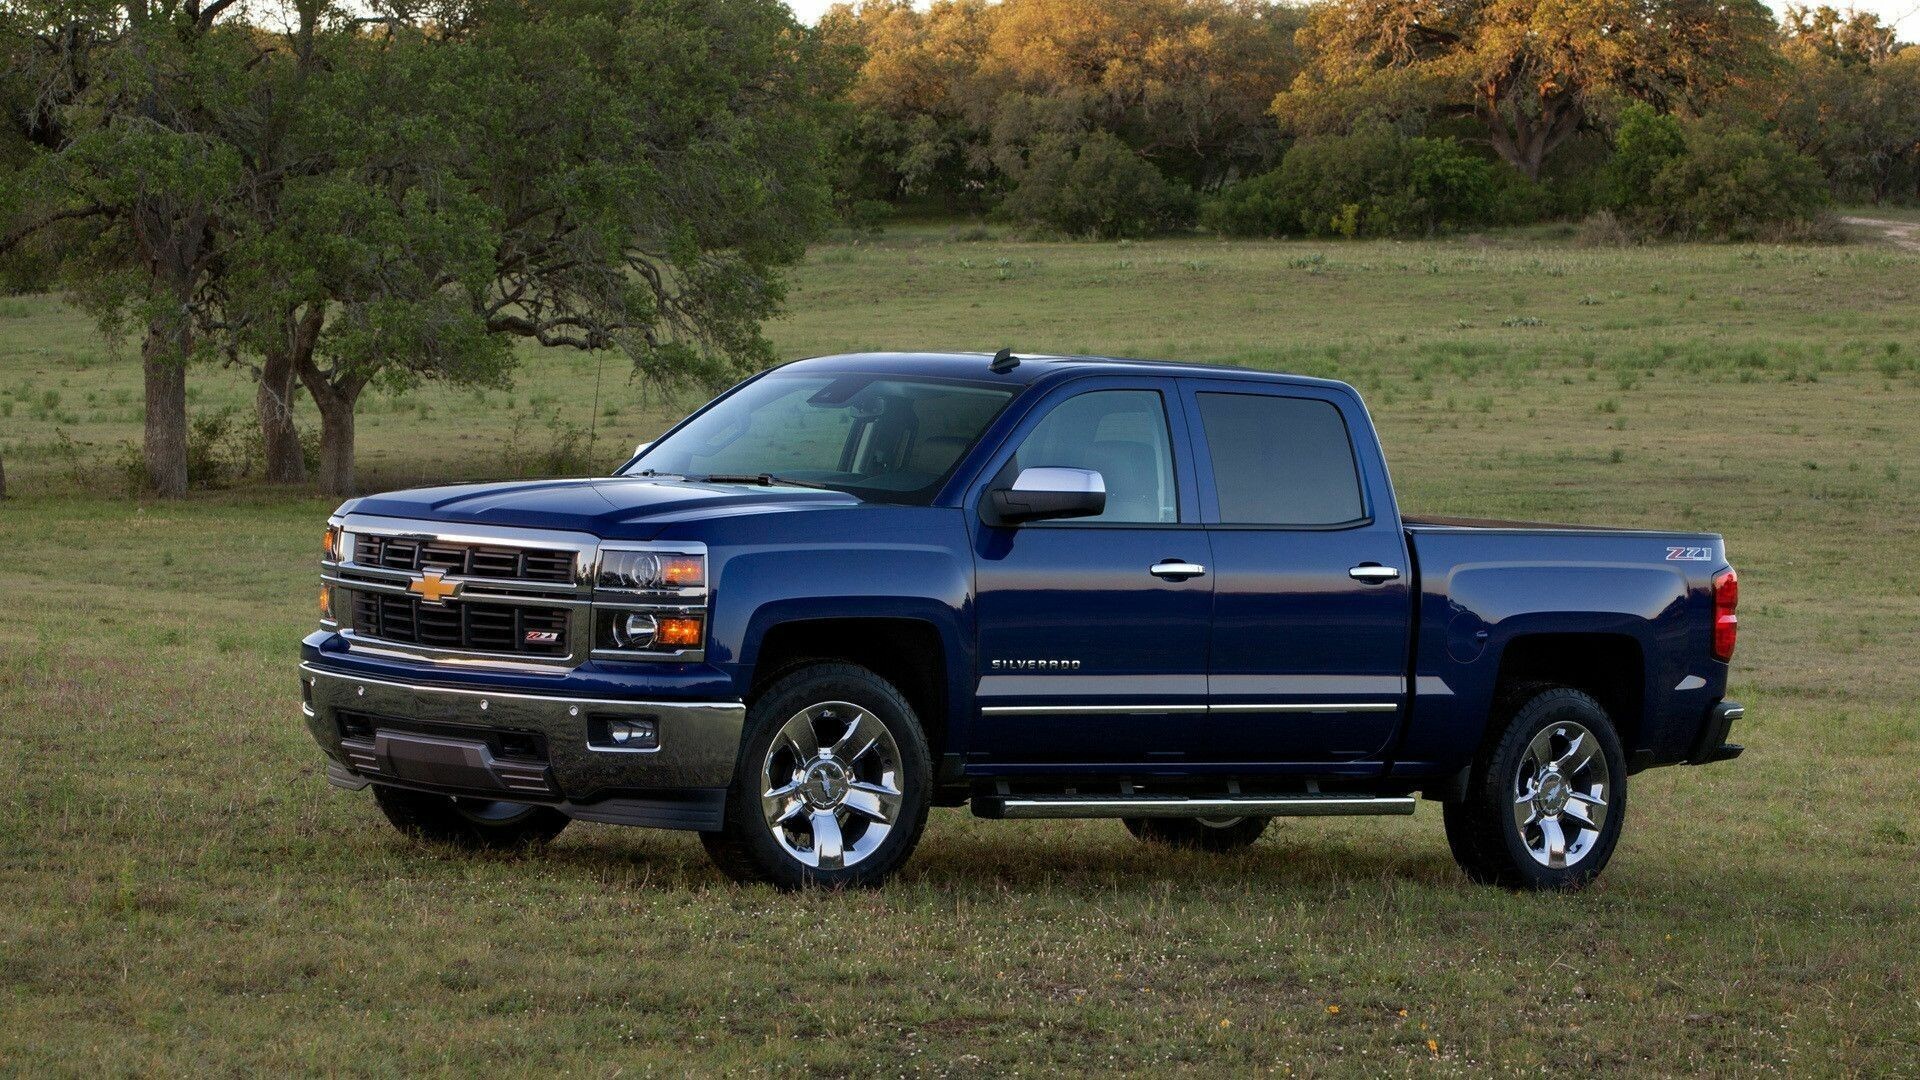 Chevrolet Silverado: Entered production for the 1999 model year, Designed for serious off-road action. 1920x1080 Full HD Background.